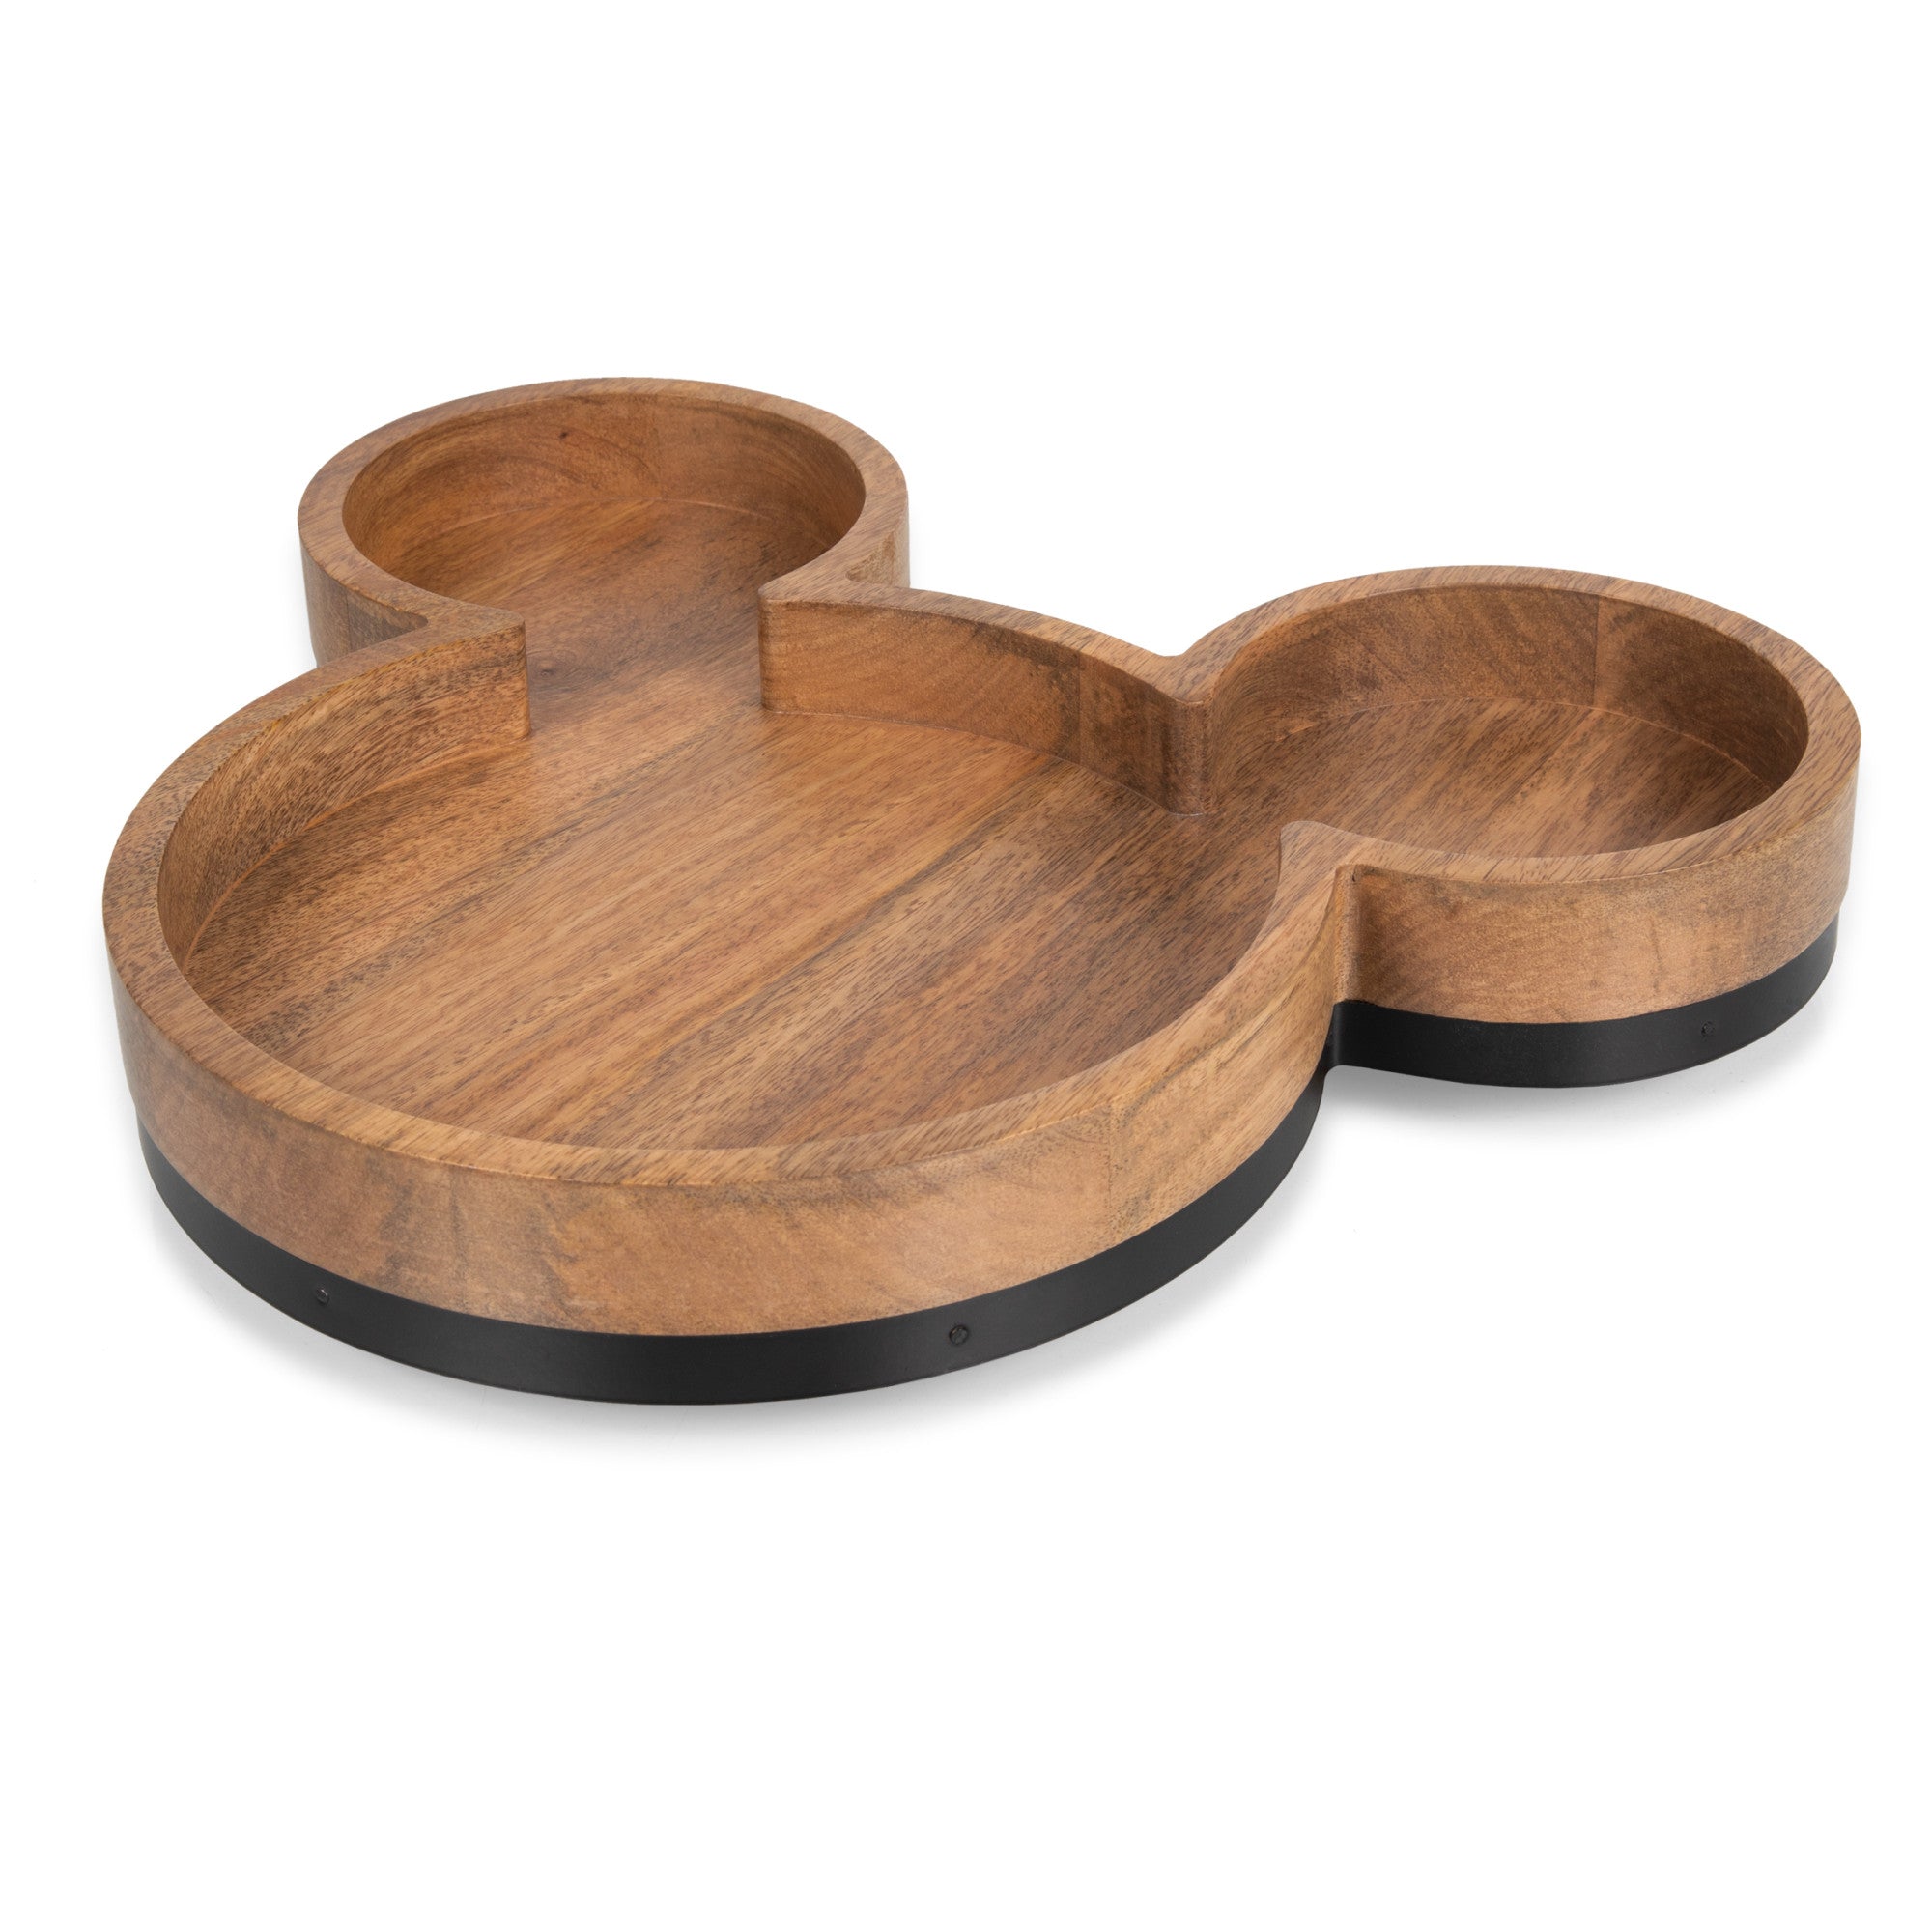 Mango Wood Coasters for Drinks with Iron Holder Stand Set of 5